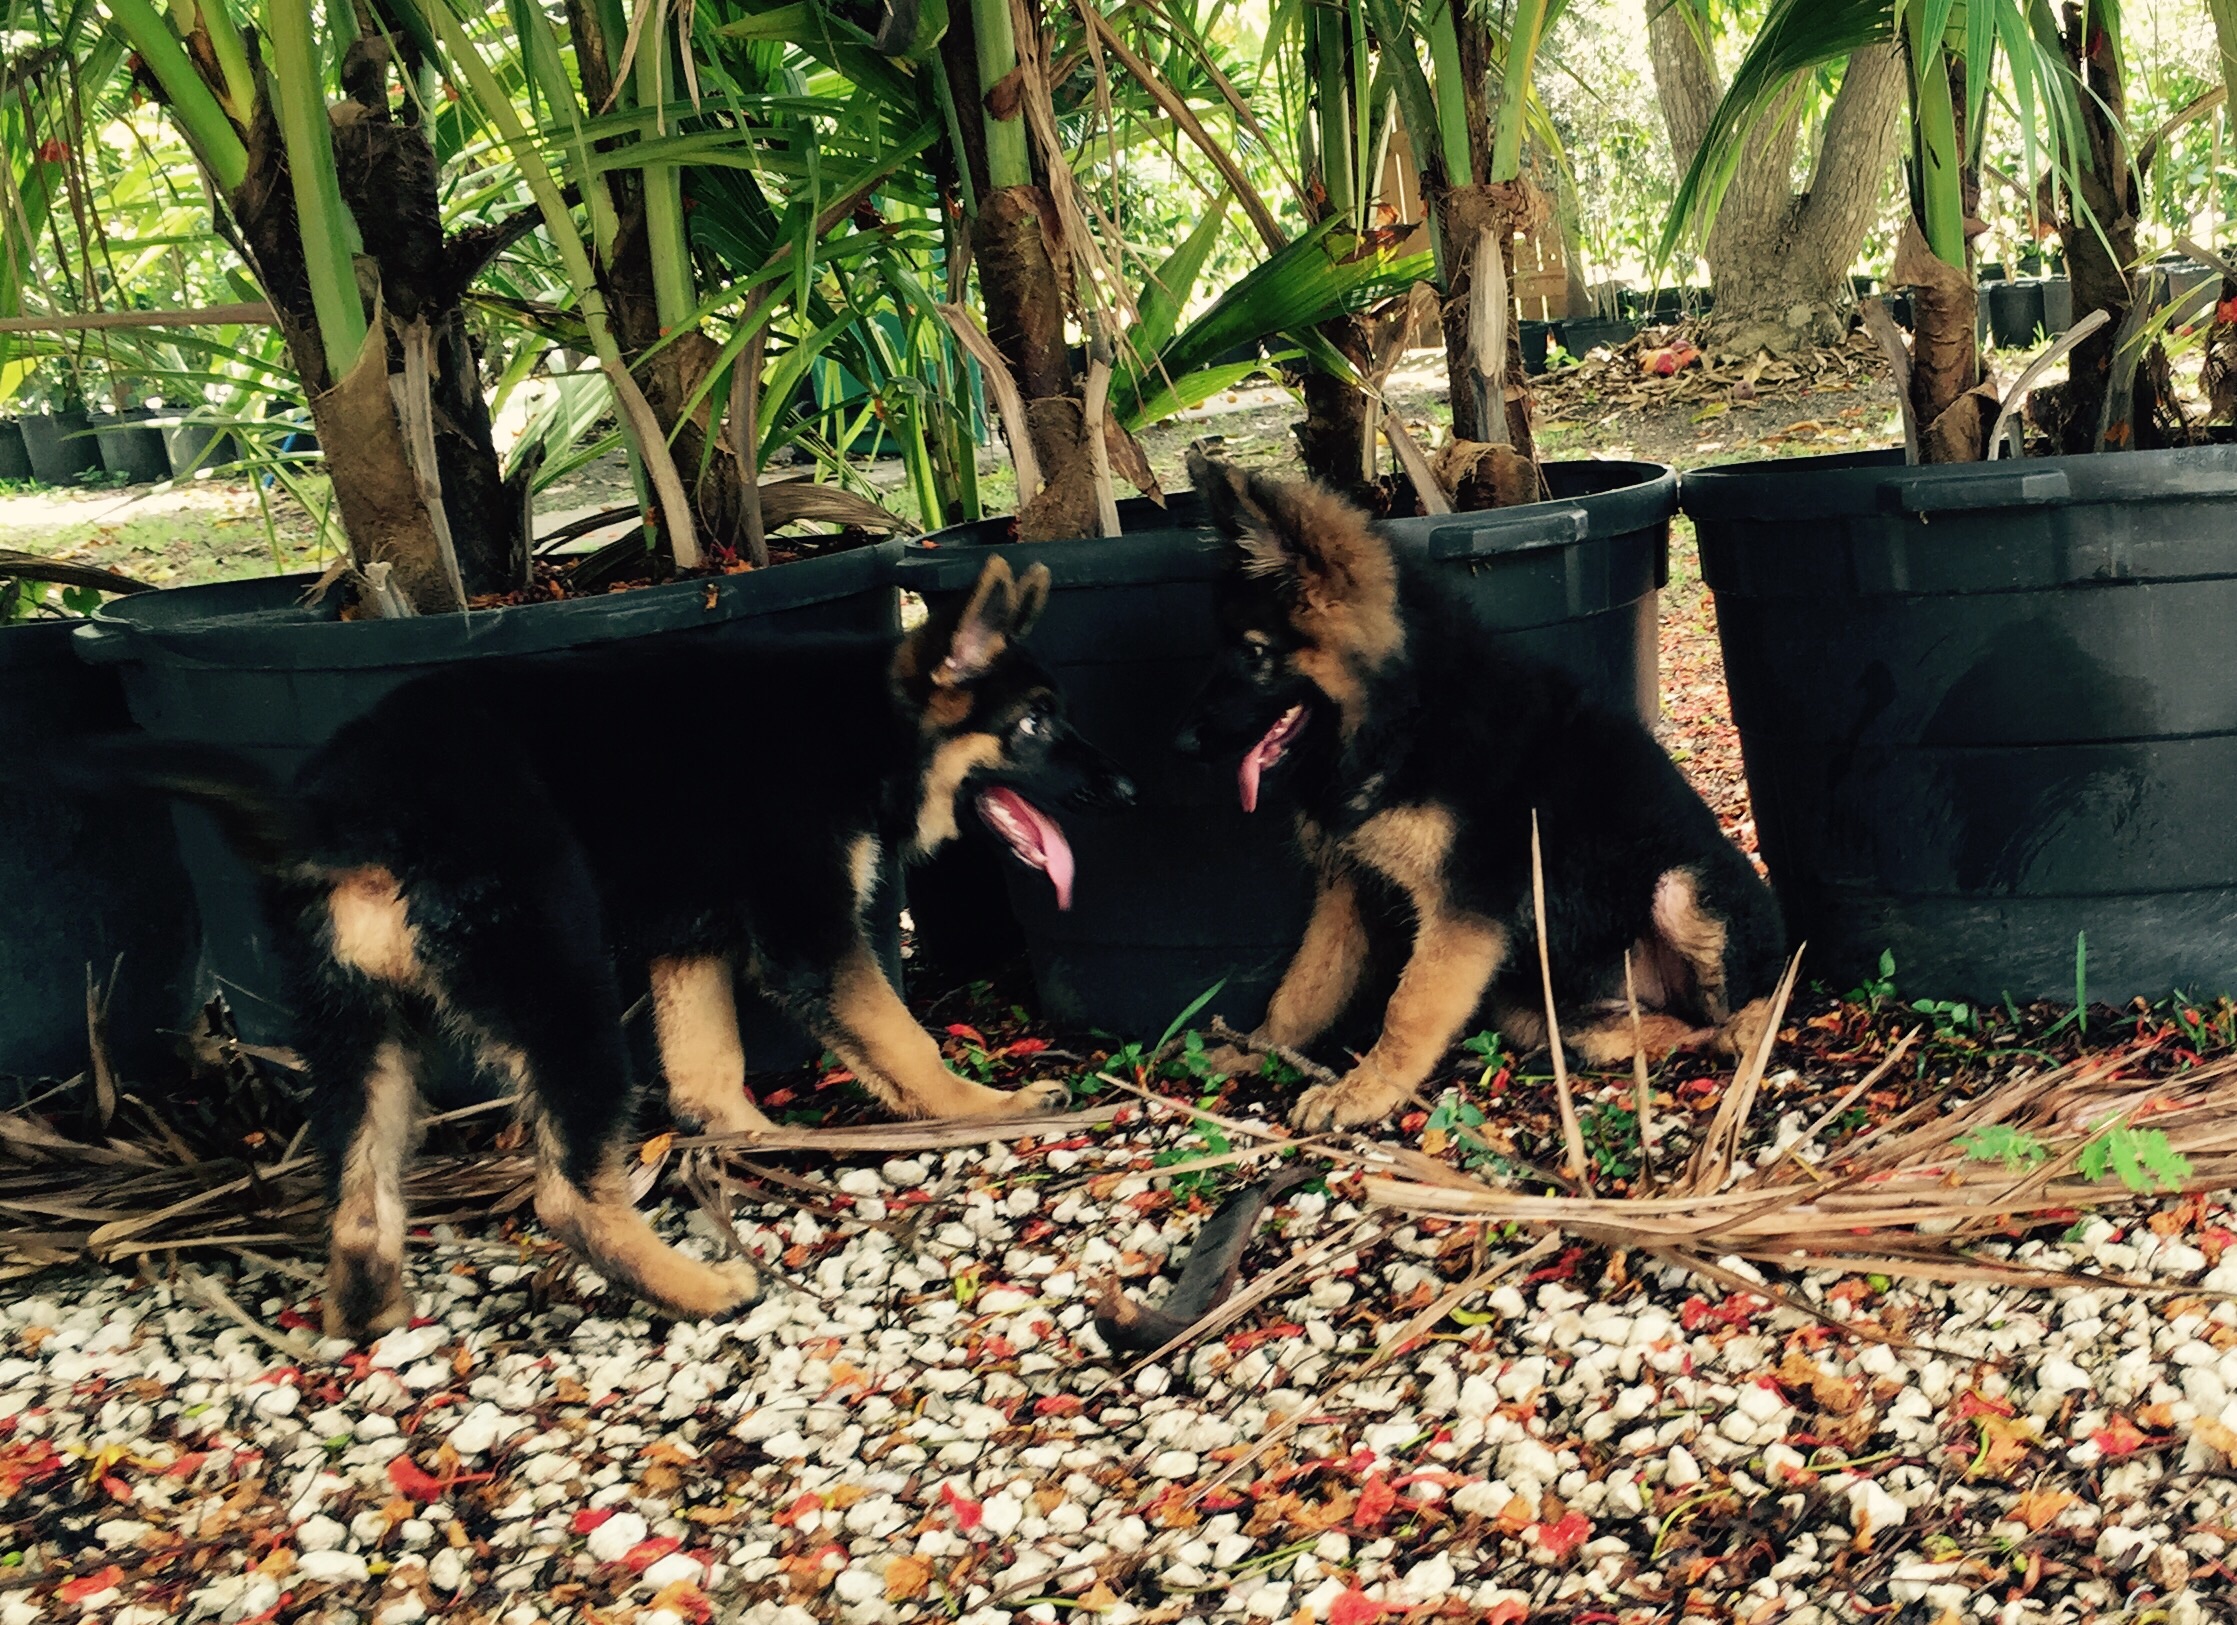 Miami Dade "County" k9  is NOT Miami Dade k9 and have never produced a single puppy even close to these top quality shepherds from Miami Dade k9